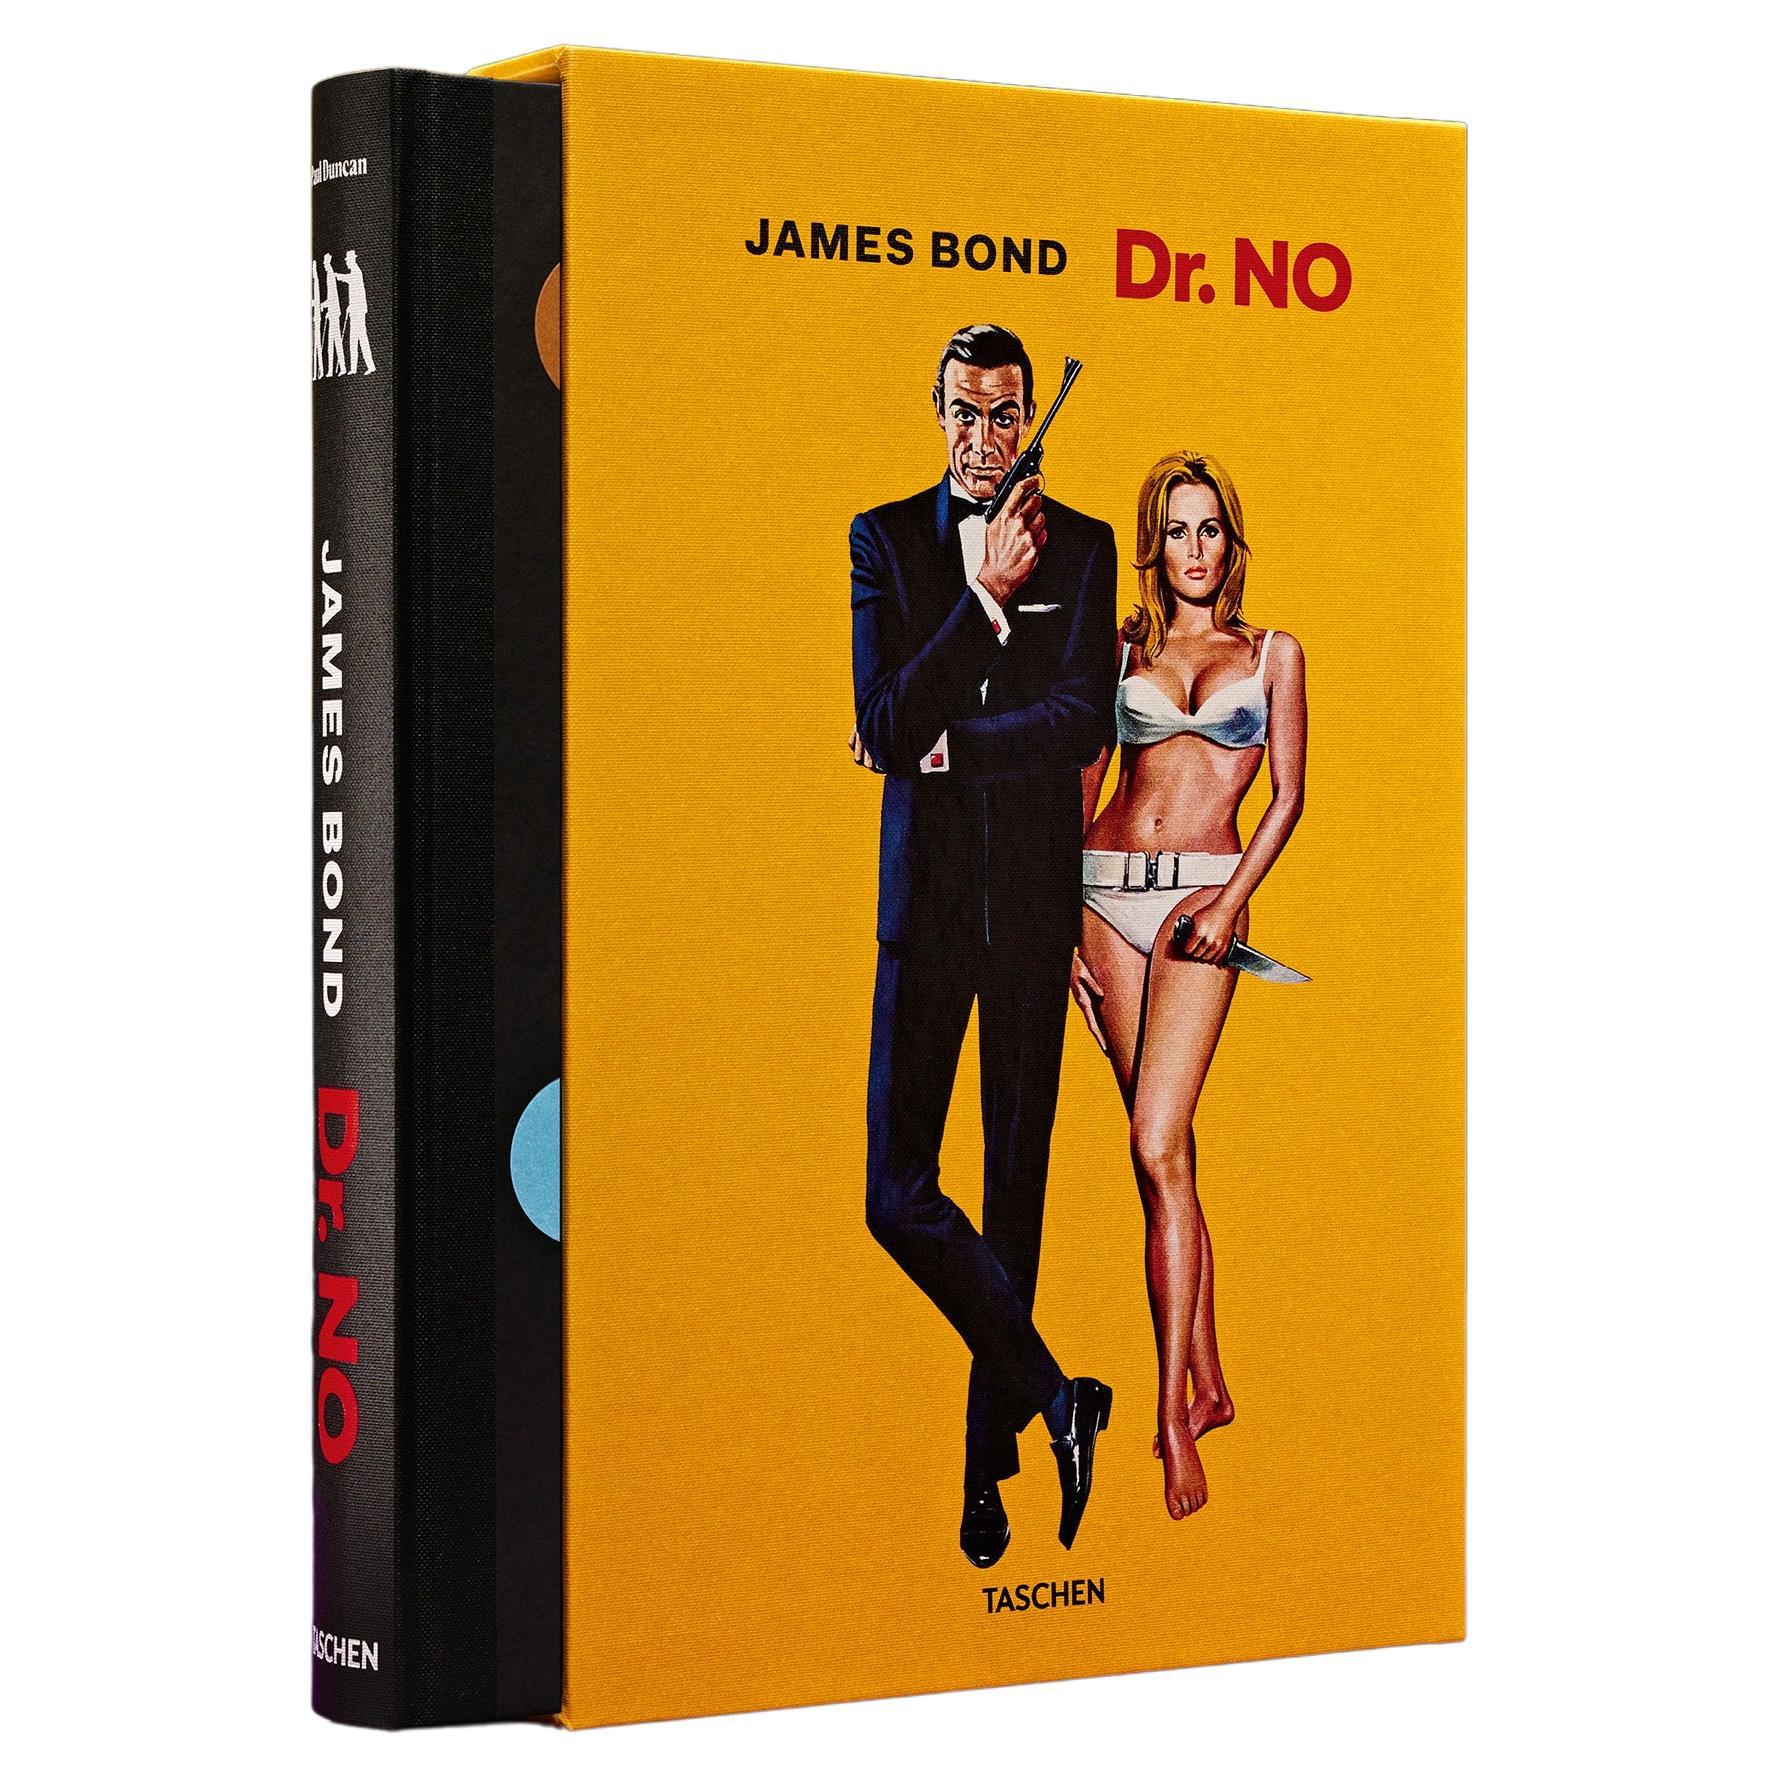 James Bond. Dr. No. Limited Edition Collector's Book.